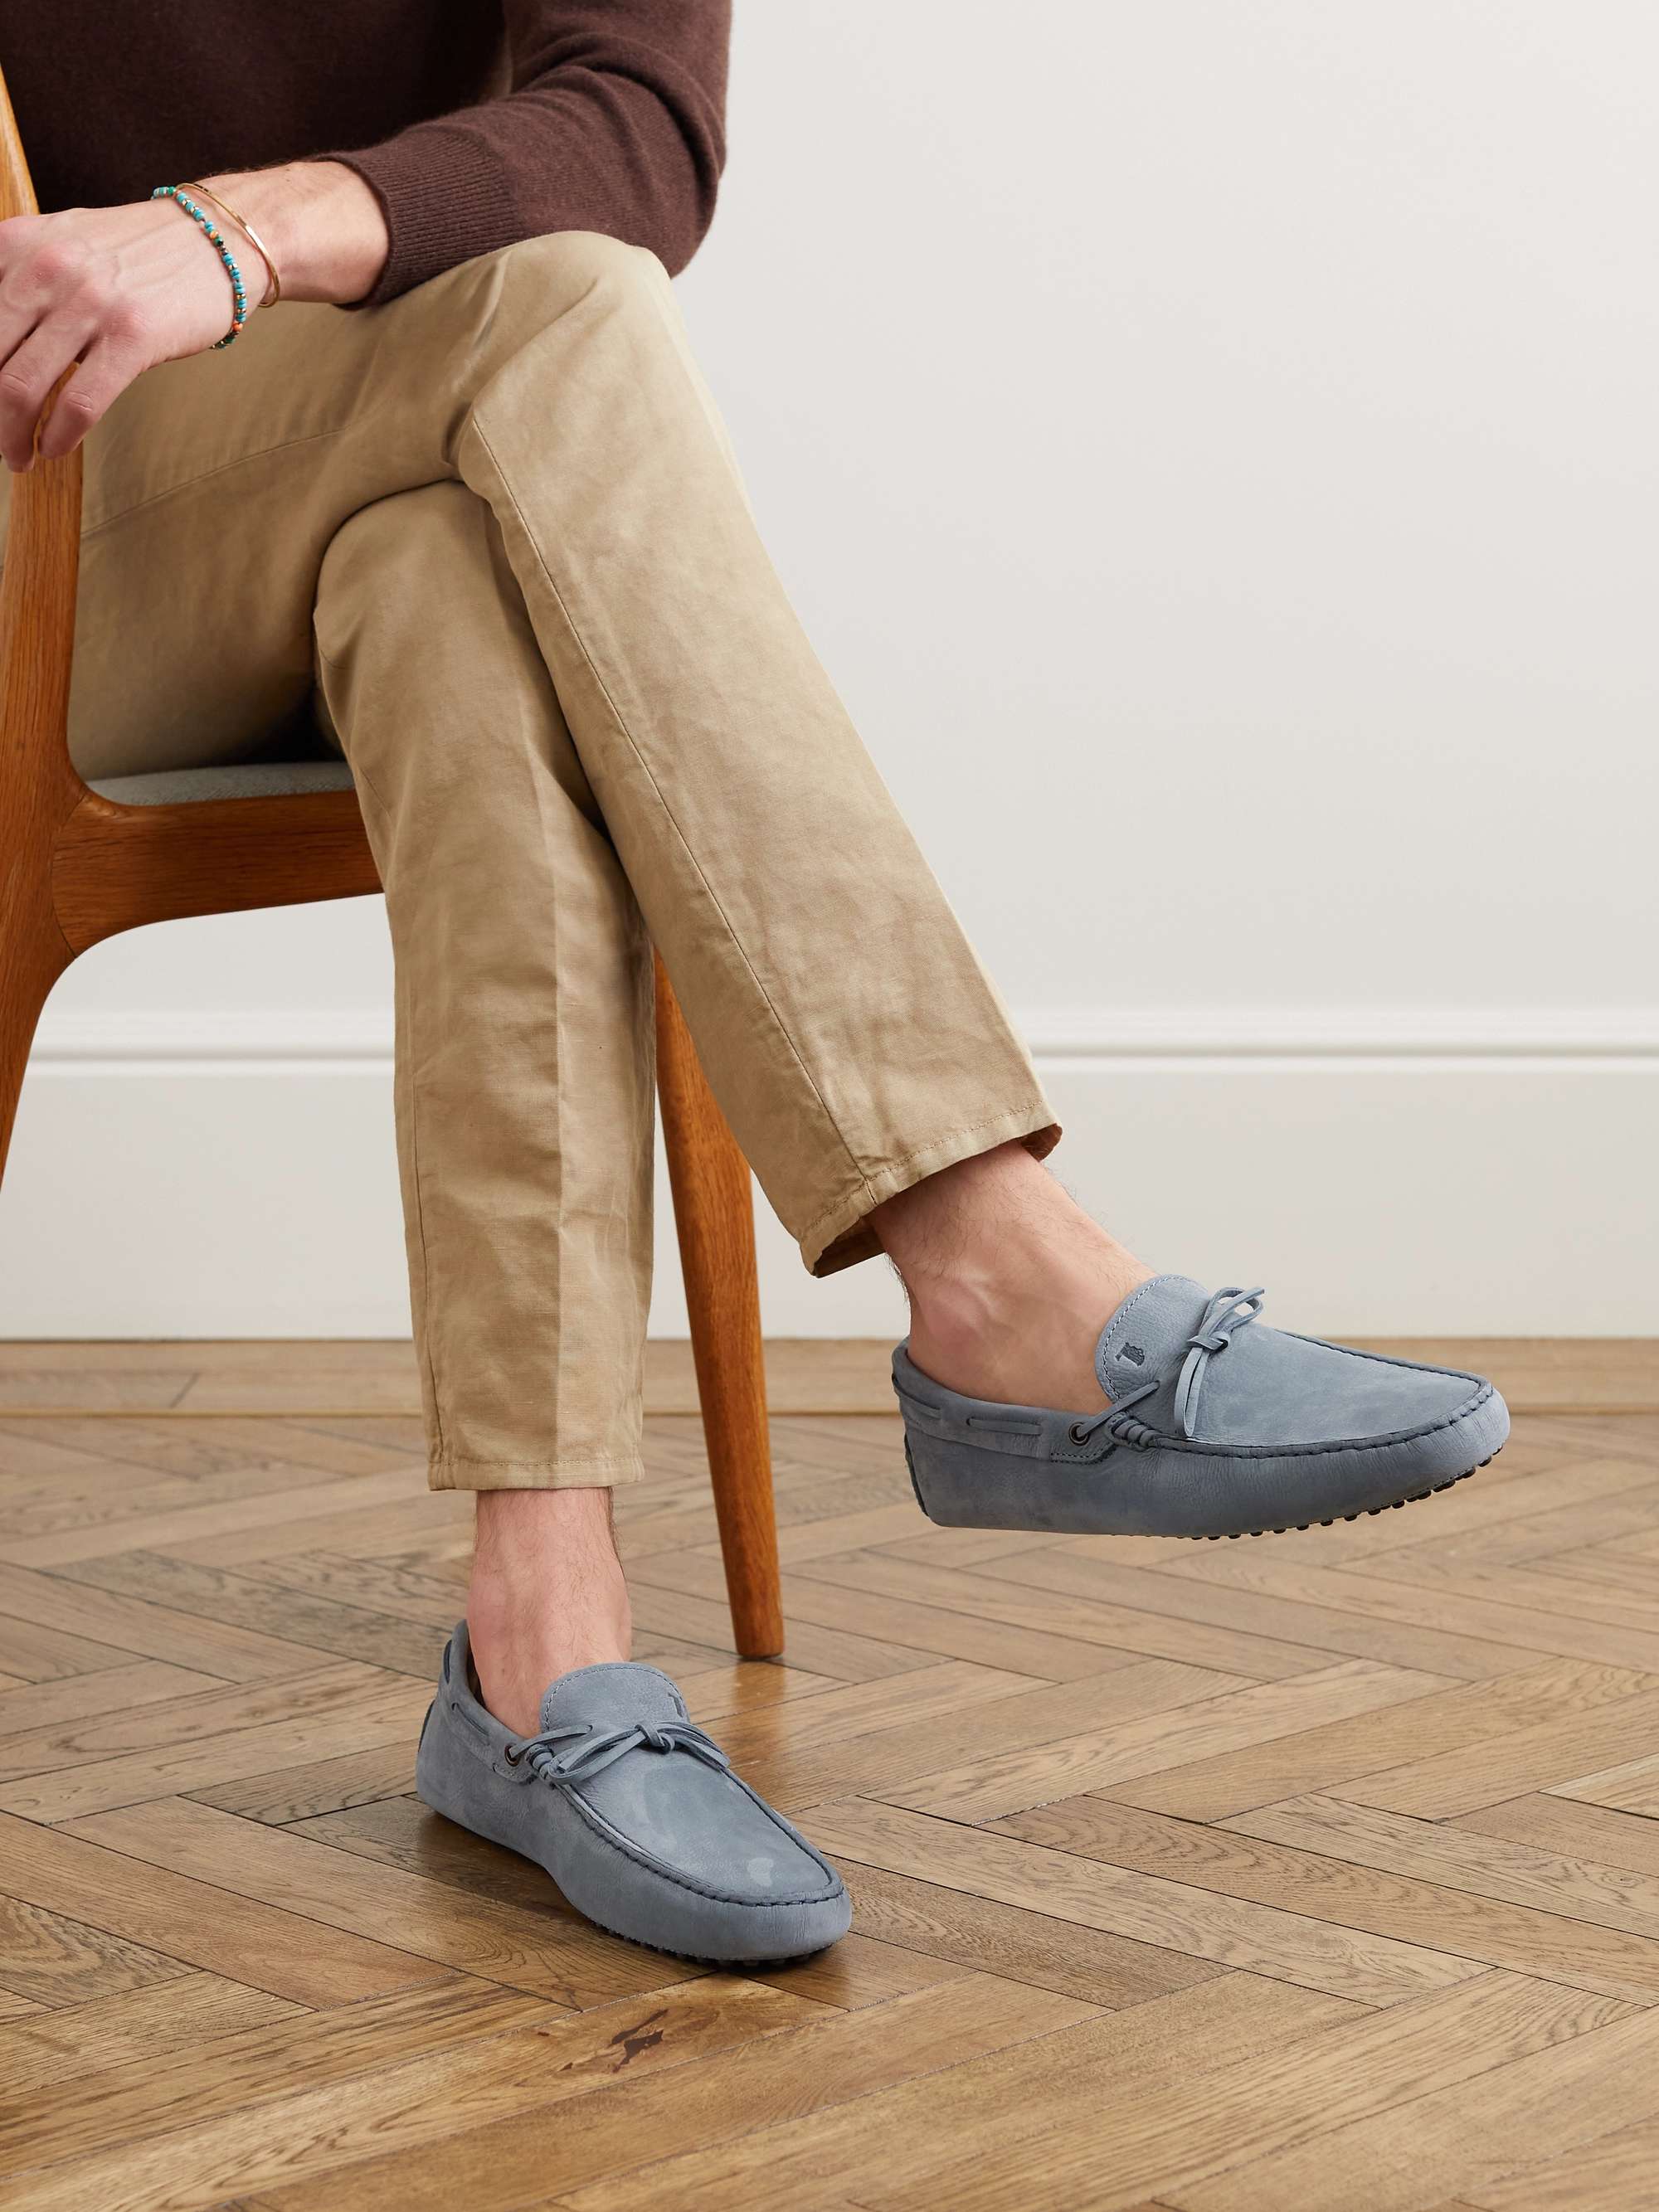 TOD'S Gommino Suede Driving Shoes | MR PORTER